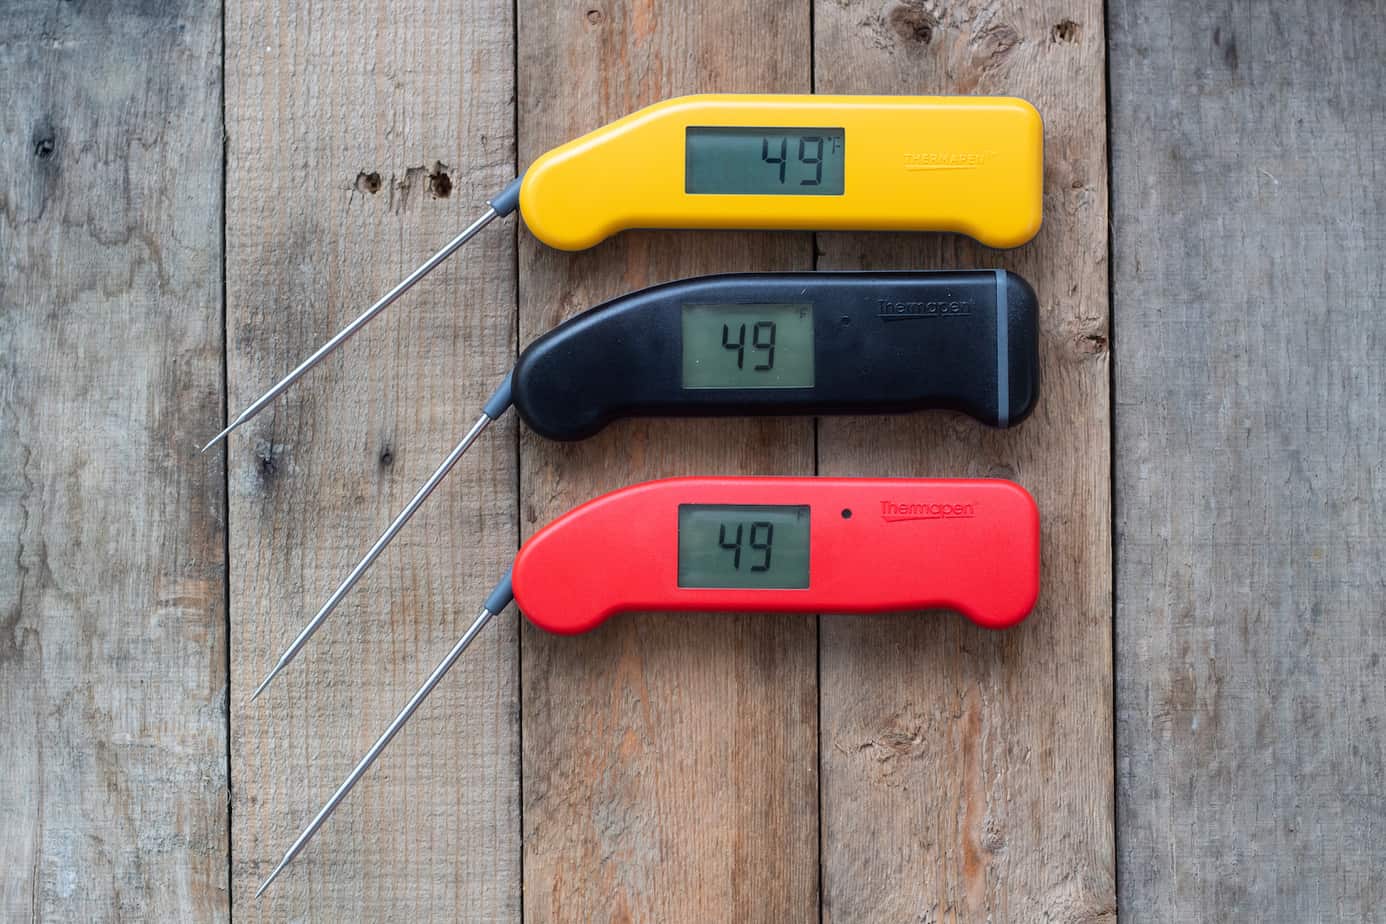 Best Meat Thermometer: ThermoWorks Thermapen MK4 Sale